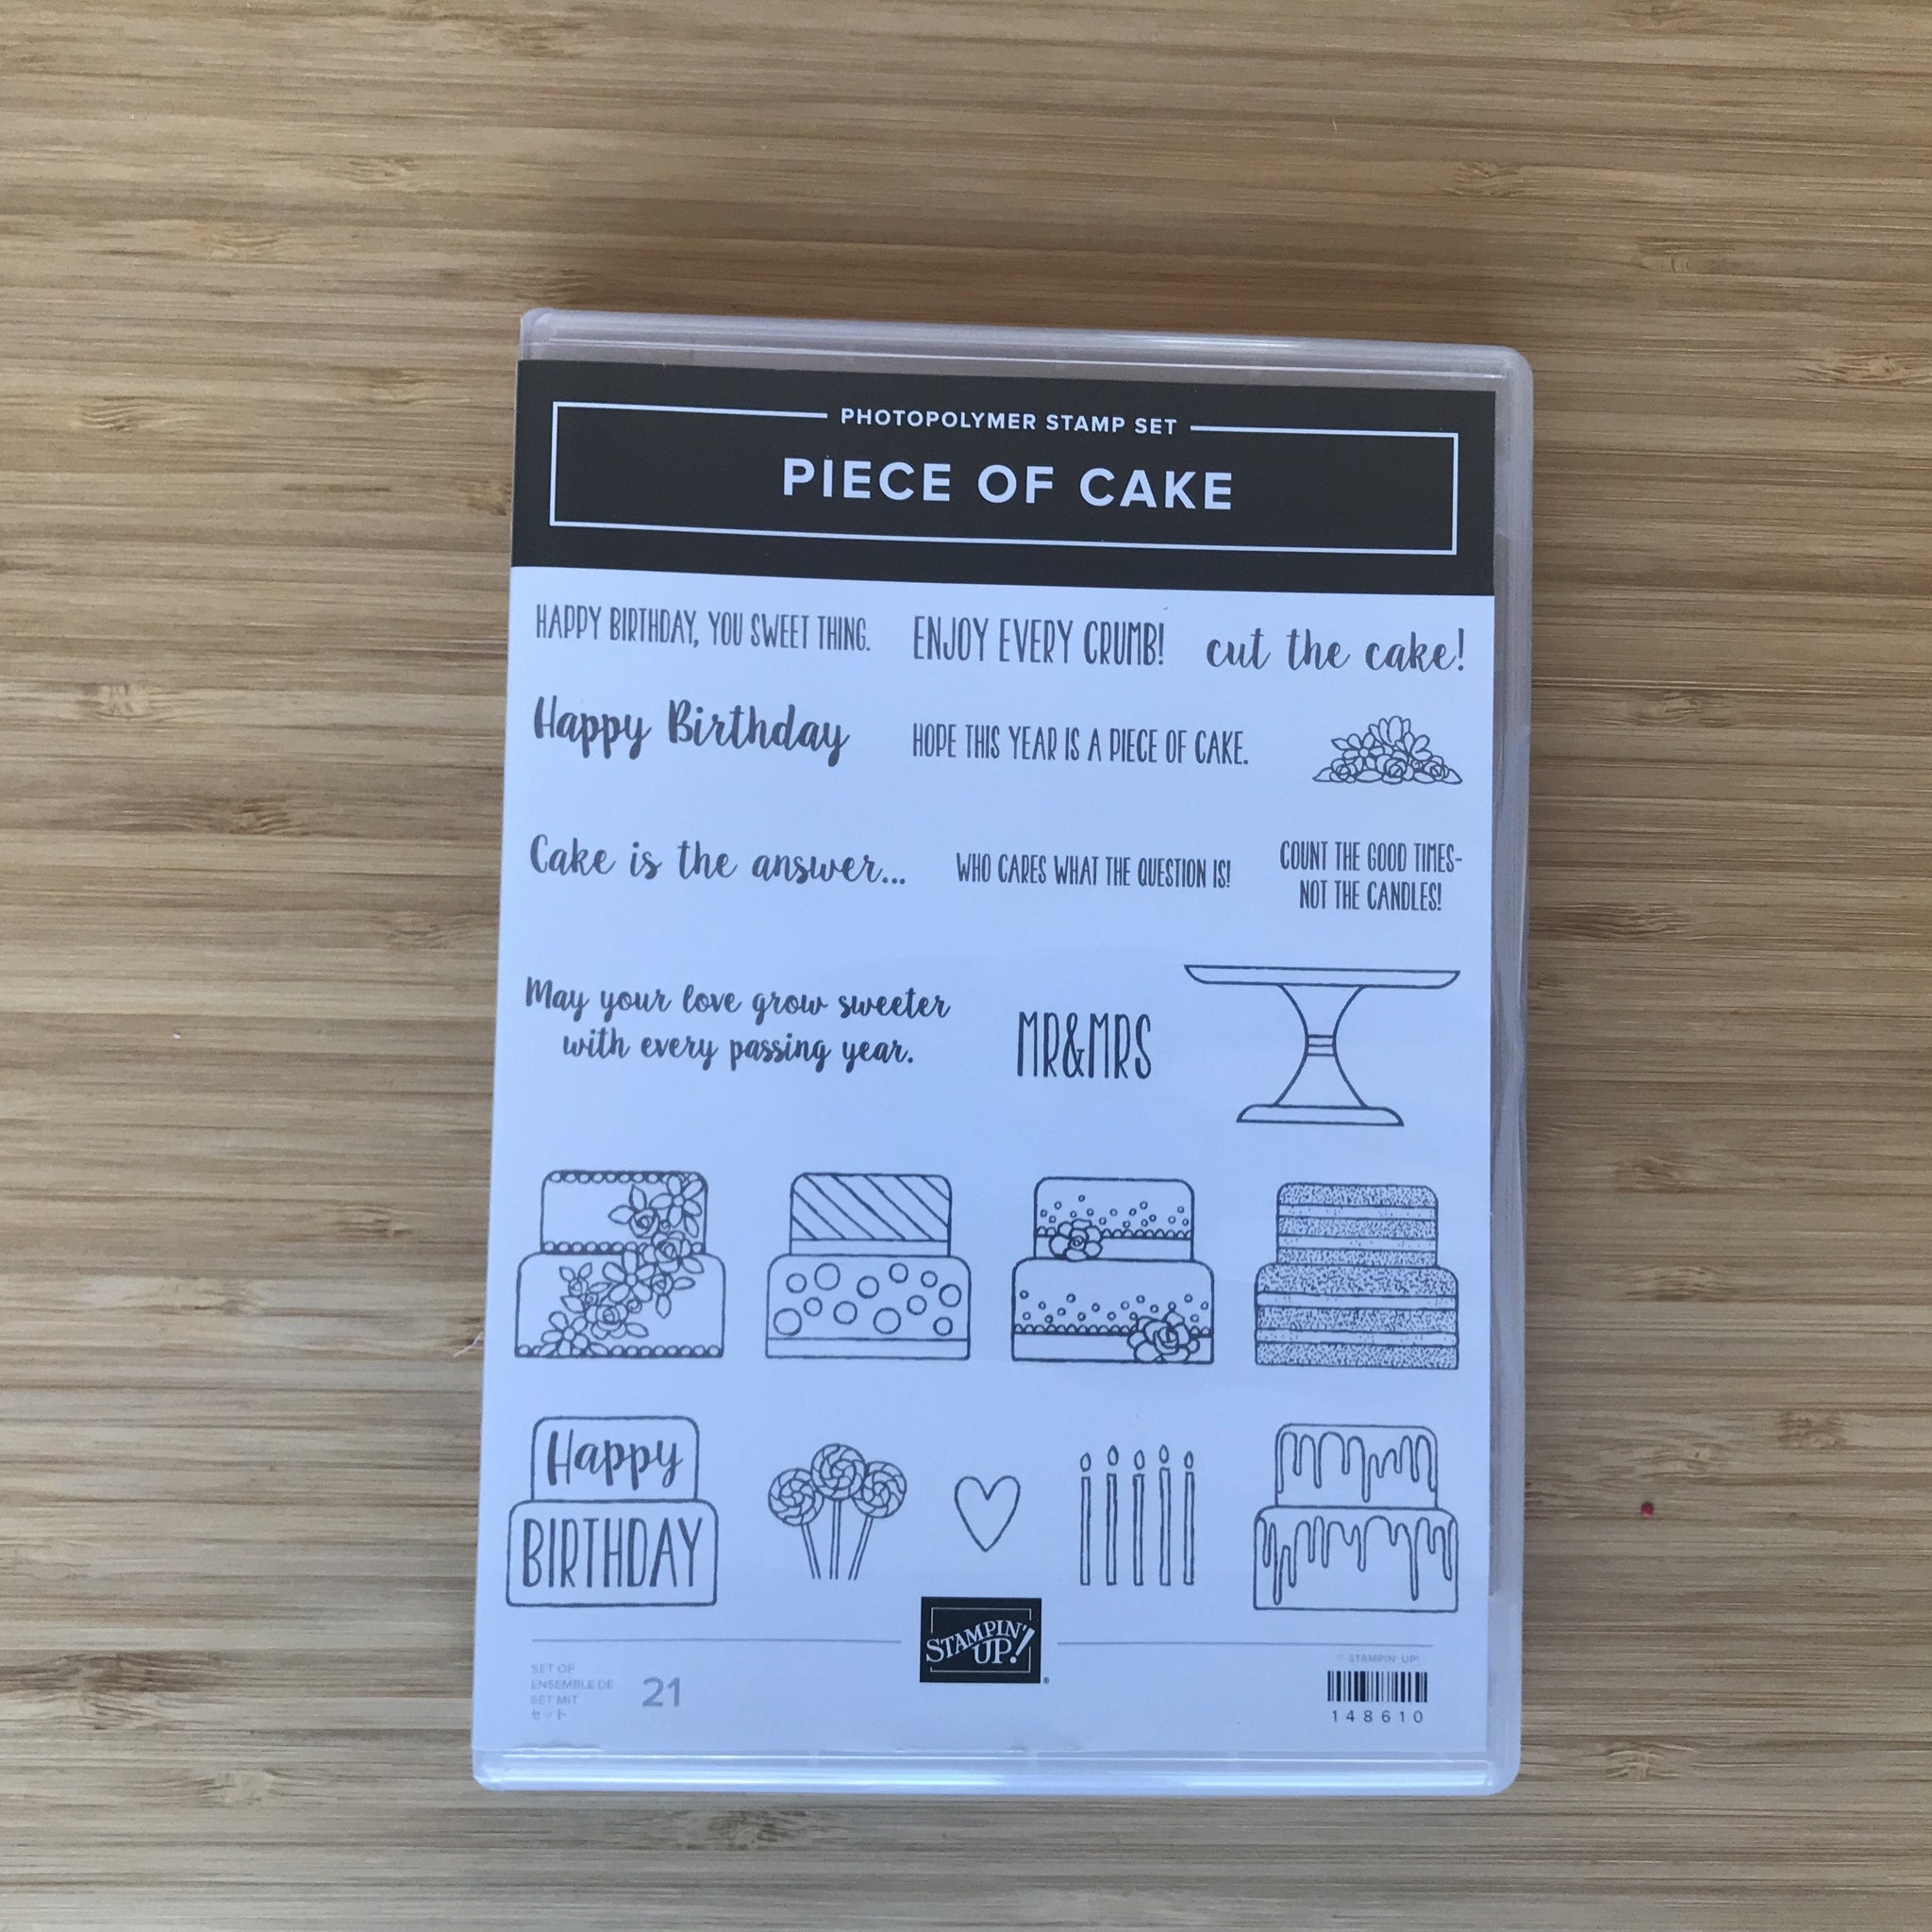 Piece of Cake | Retired Photopolymer Stamp Set | Stampin' Up!®